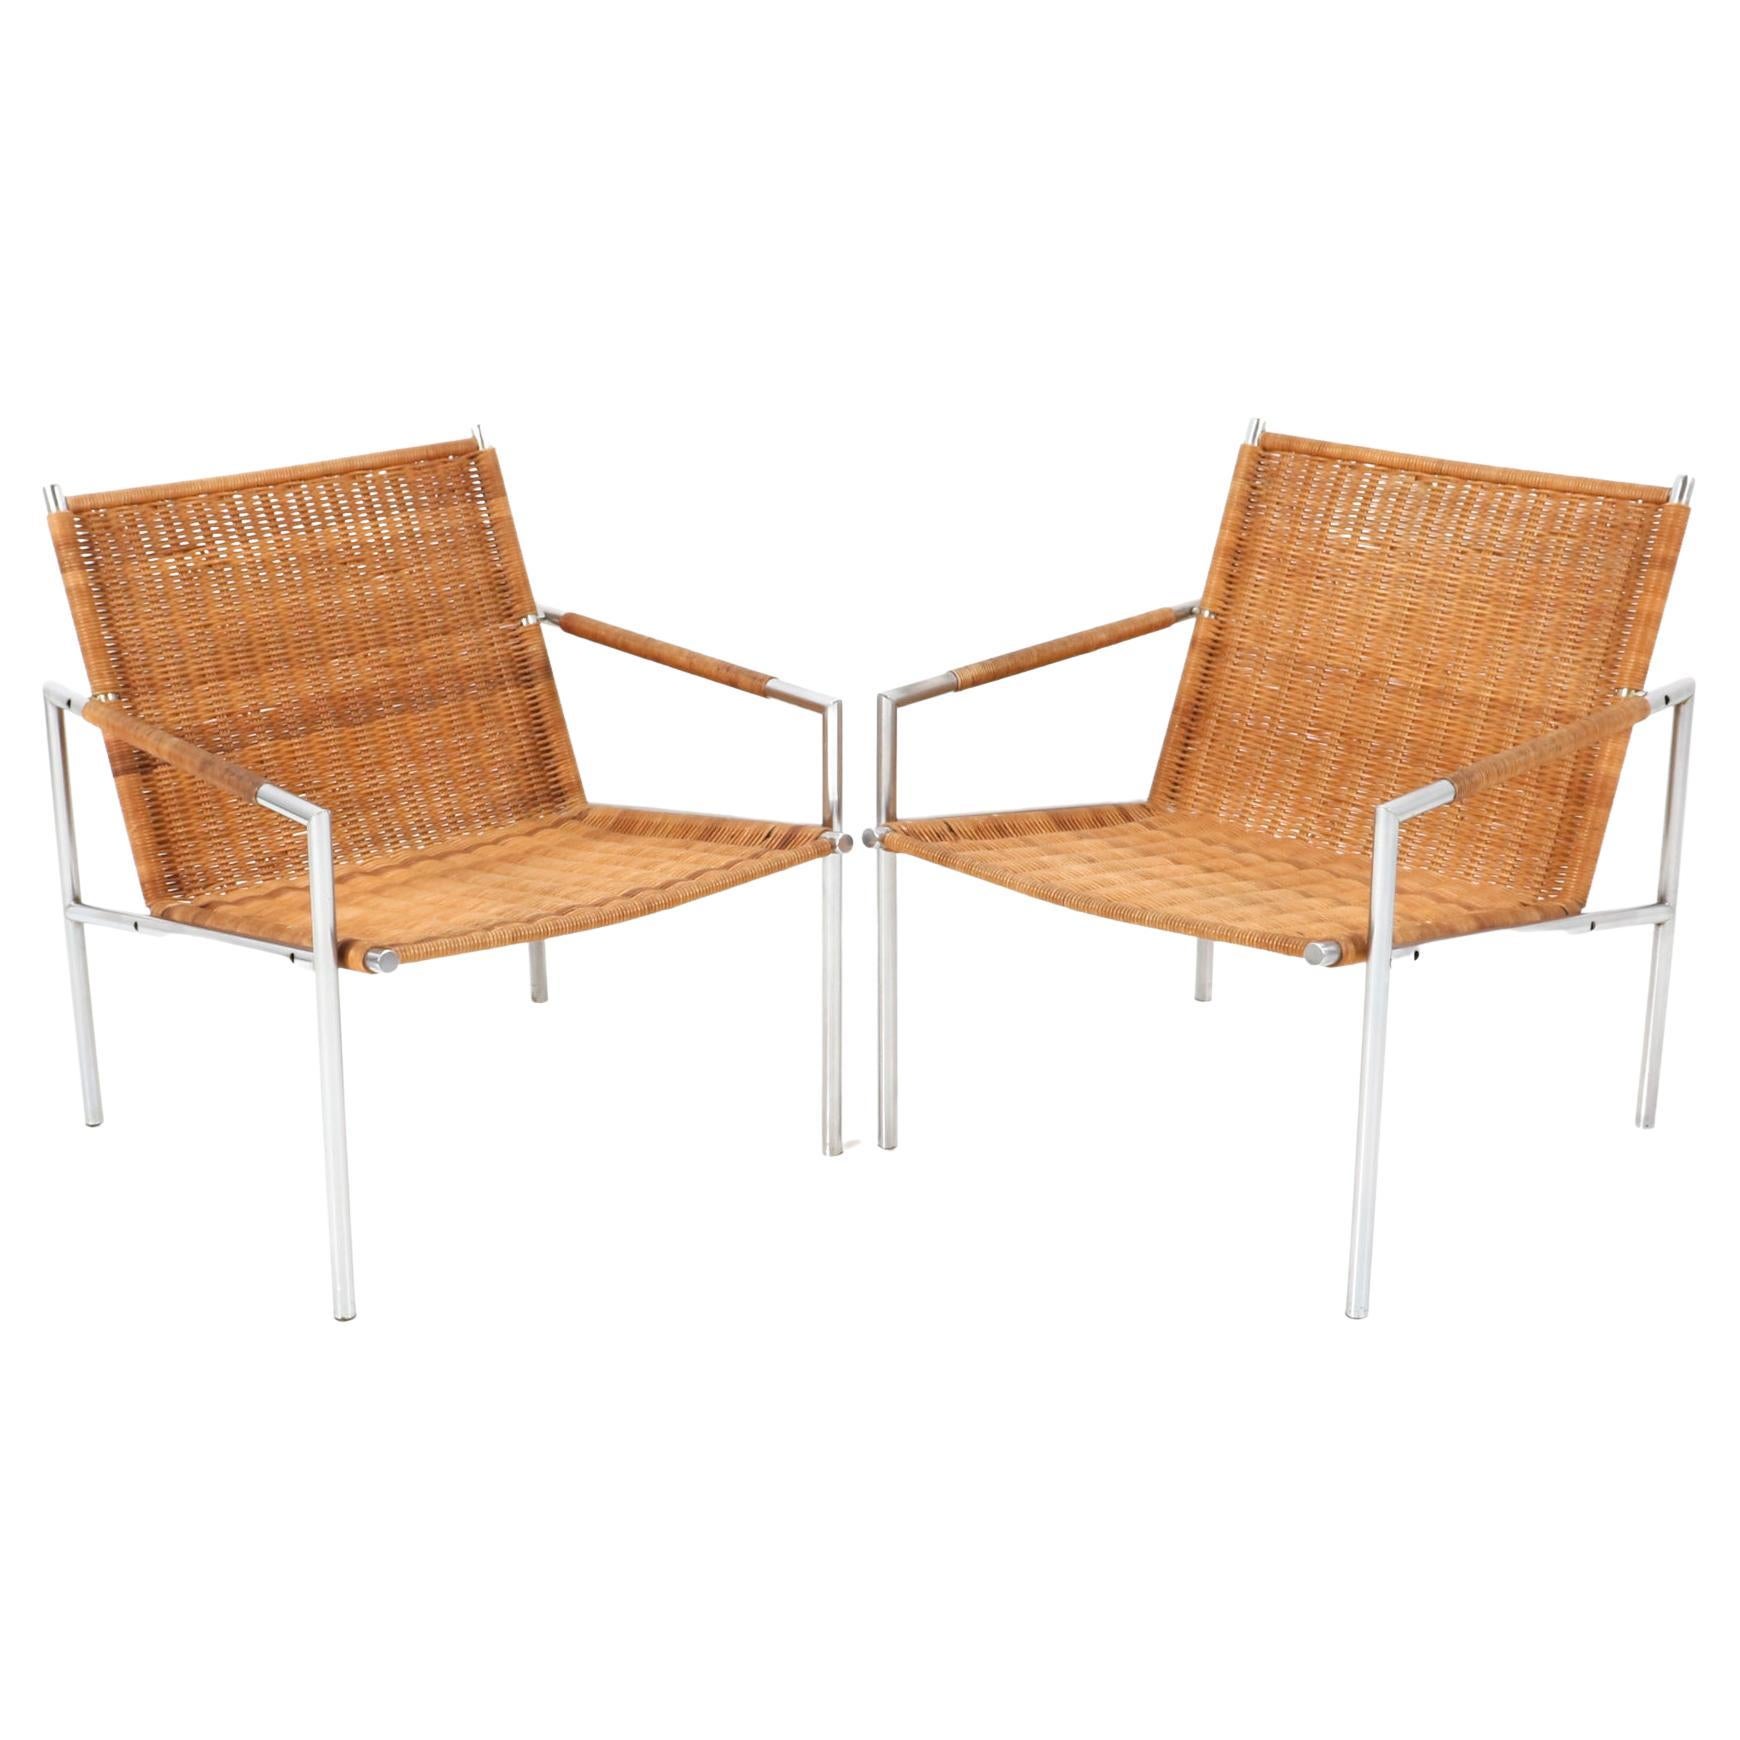 Two Mid-Century Modern SZ01 Lounge Chairs by Martin Visser for 'T Spectrum